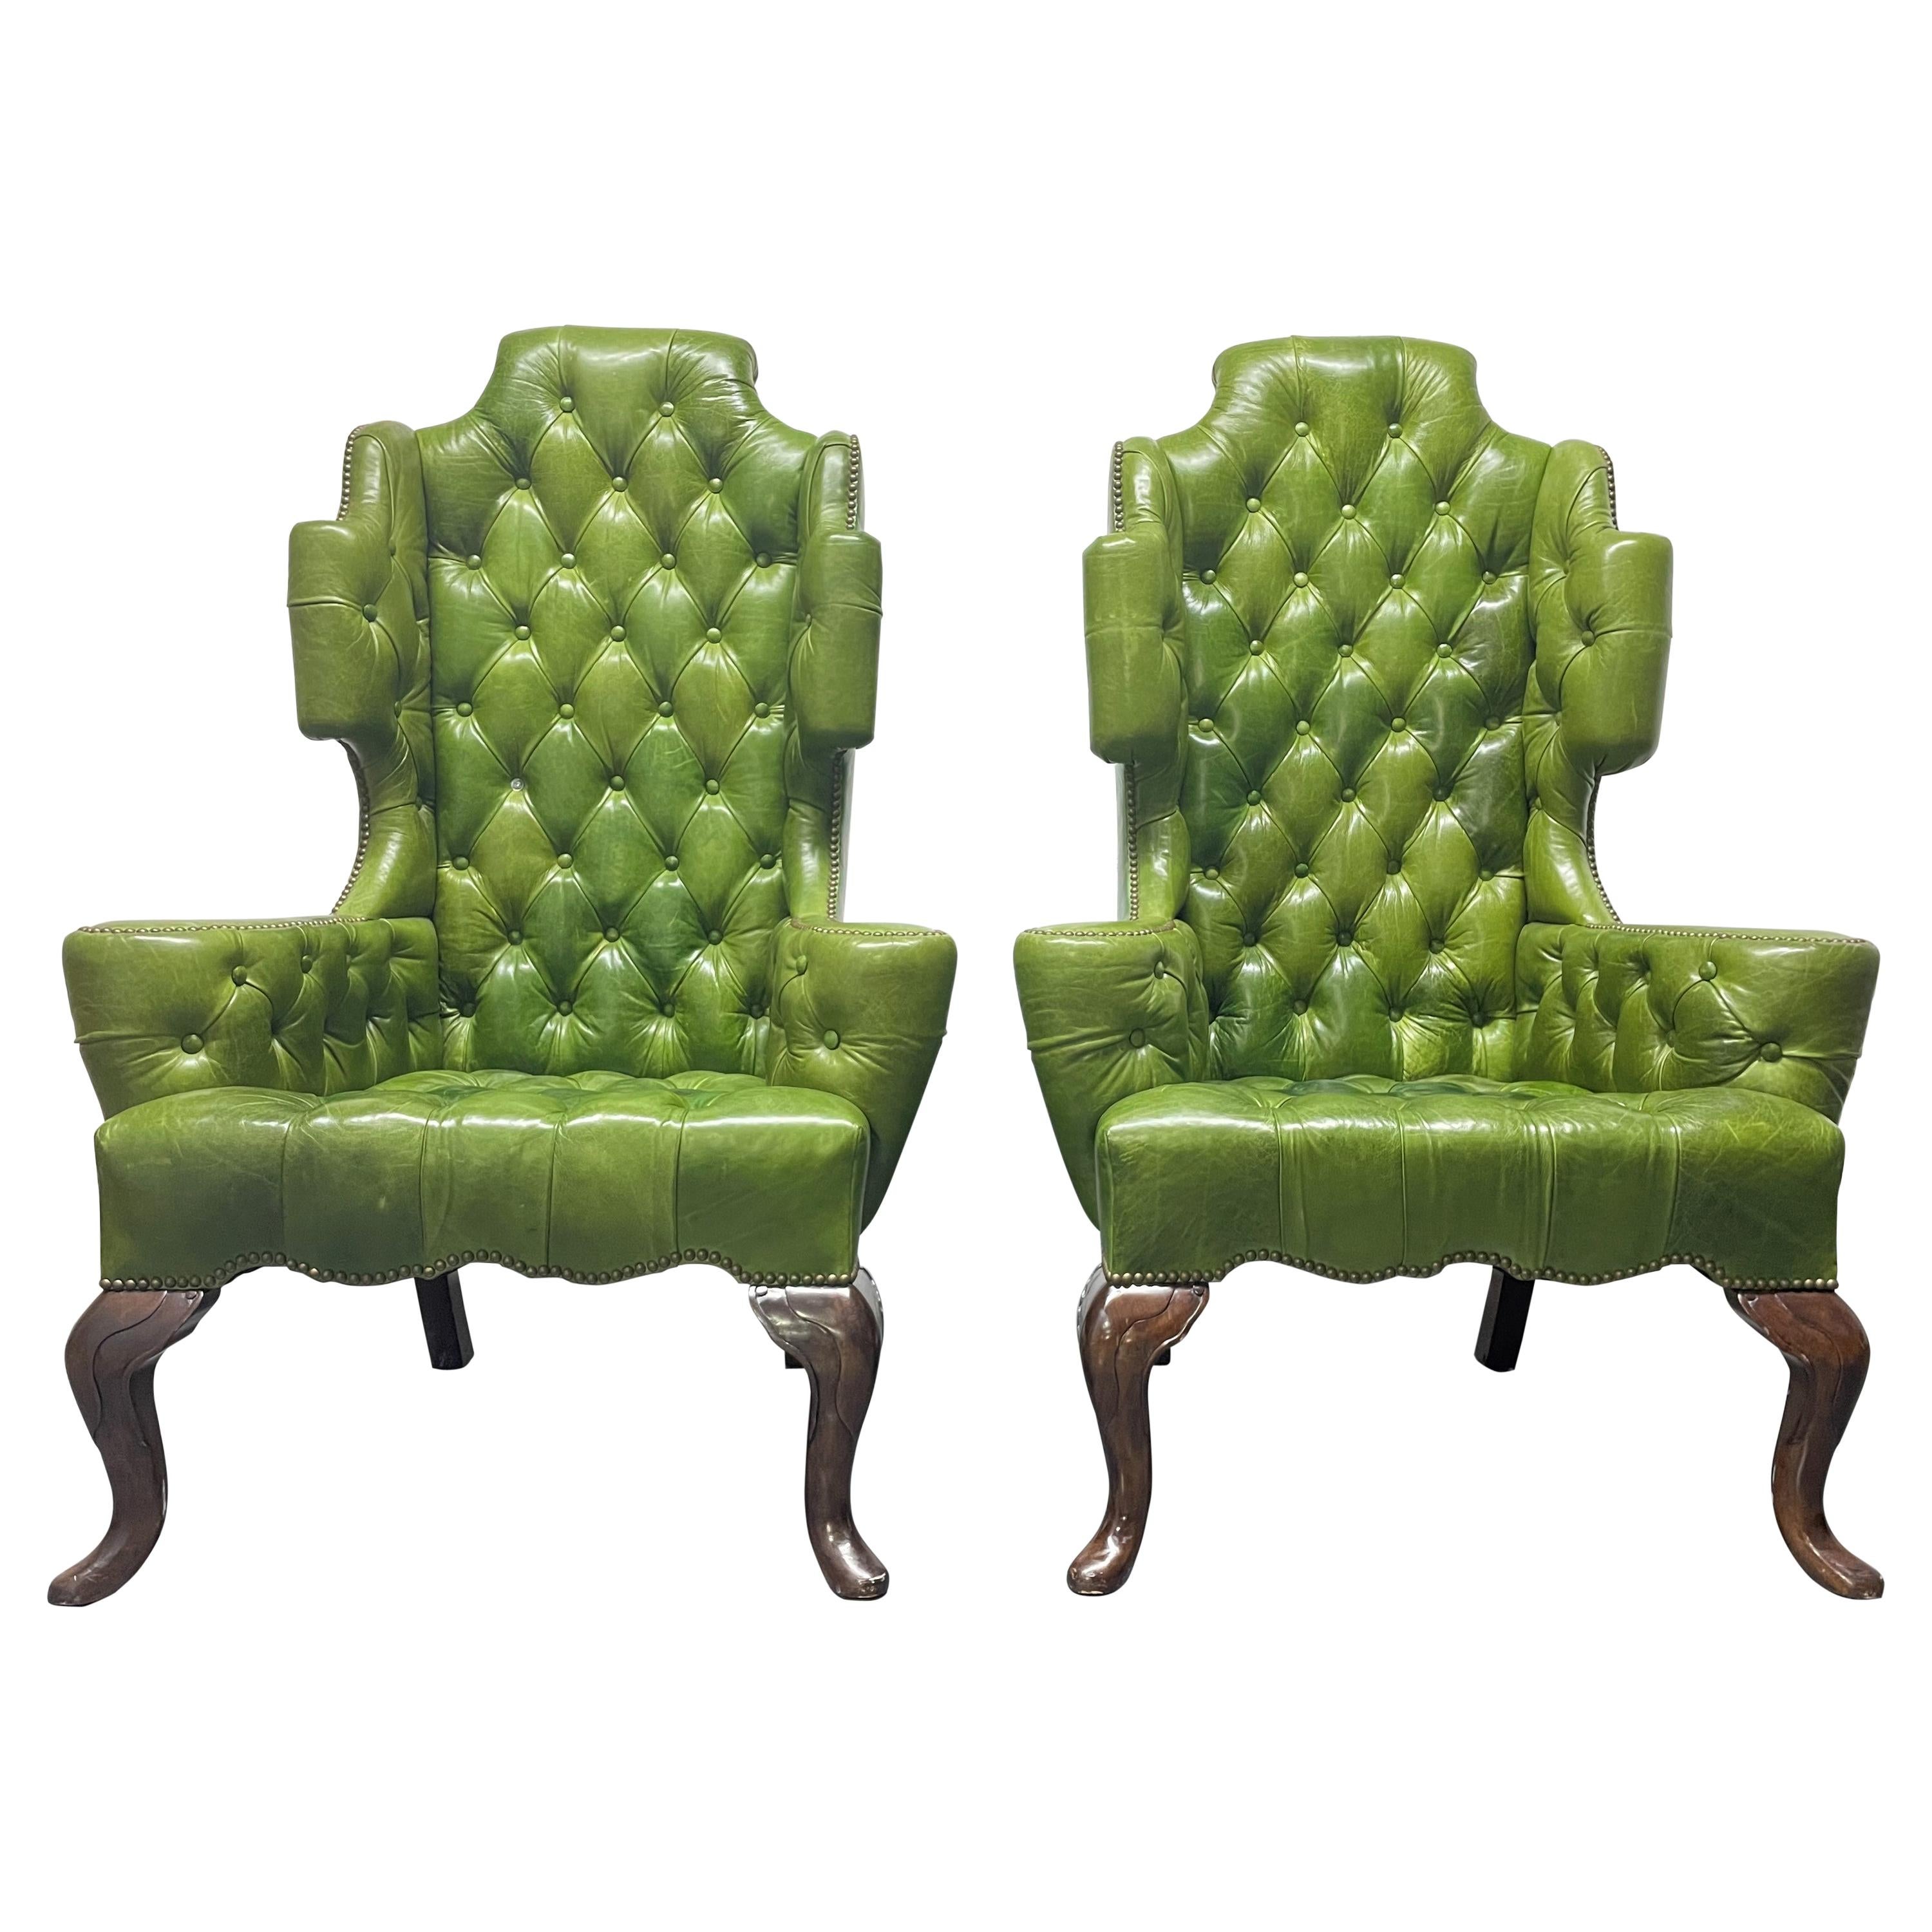 Pair Antique Style Tufted Leather Wingback Chairs For Sale